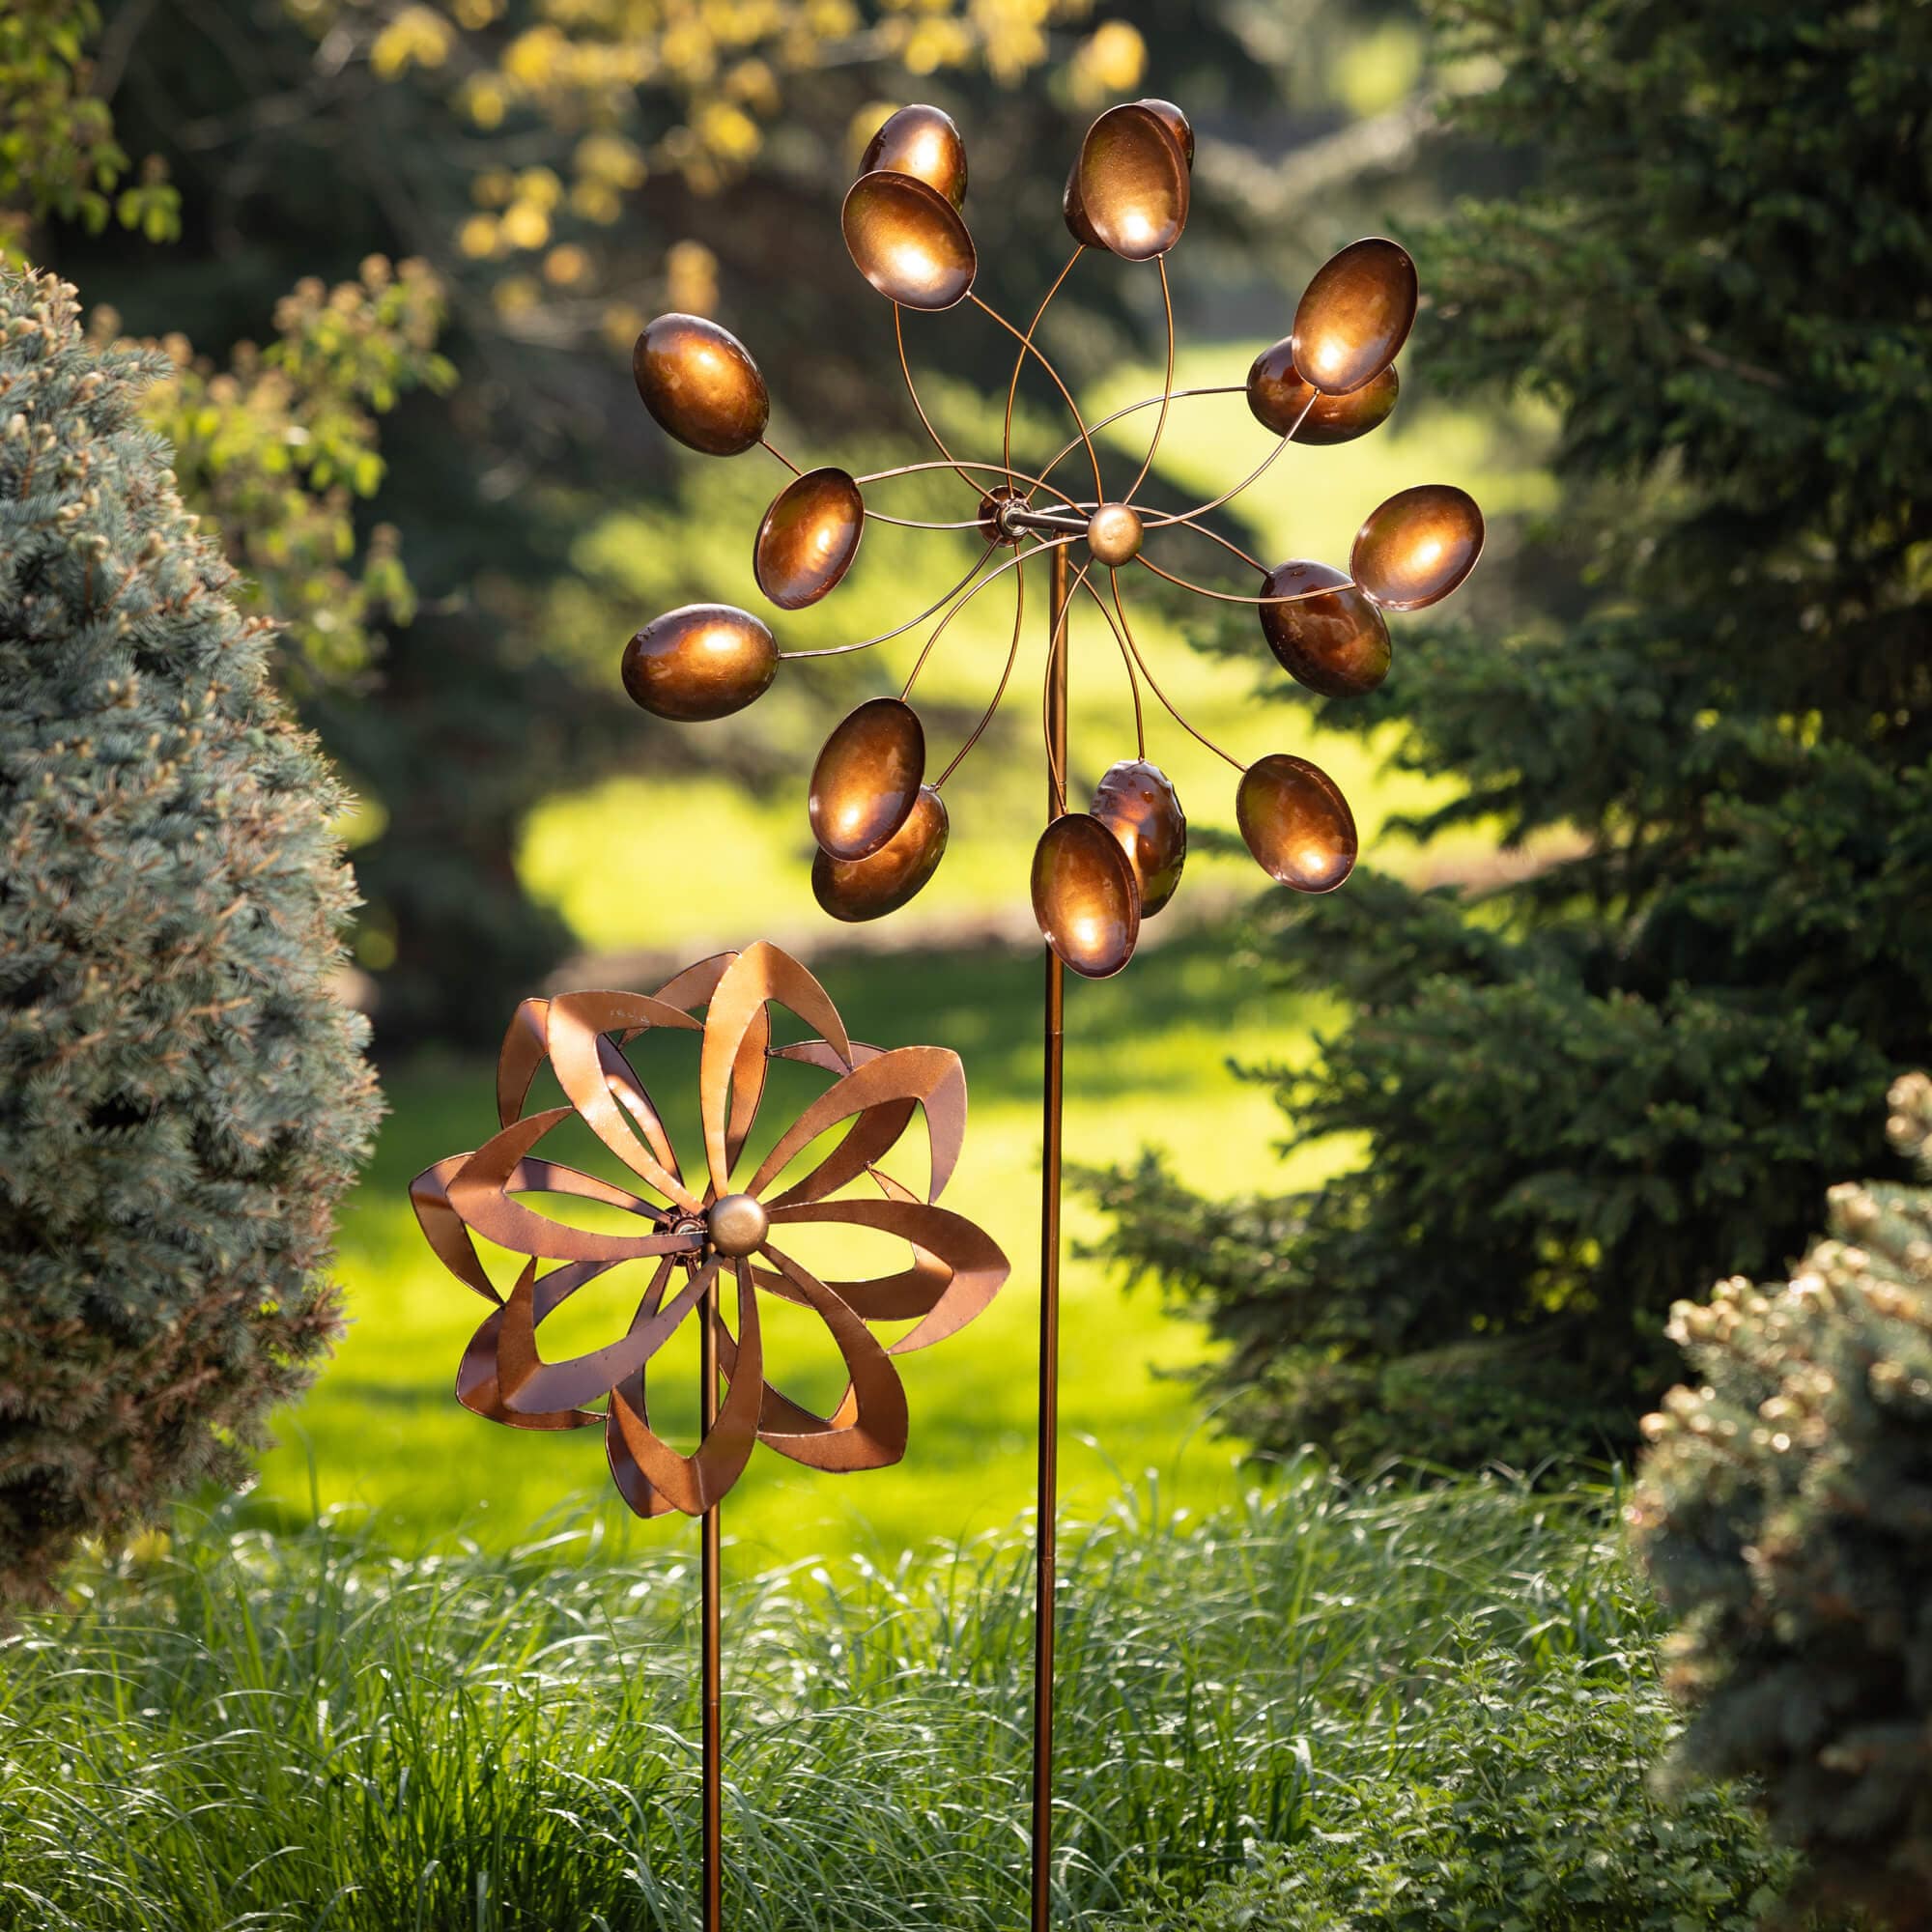 Swirling Copper Garden Kinetic Sculpture Stake Elevate Home Decor - Outdoors